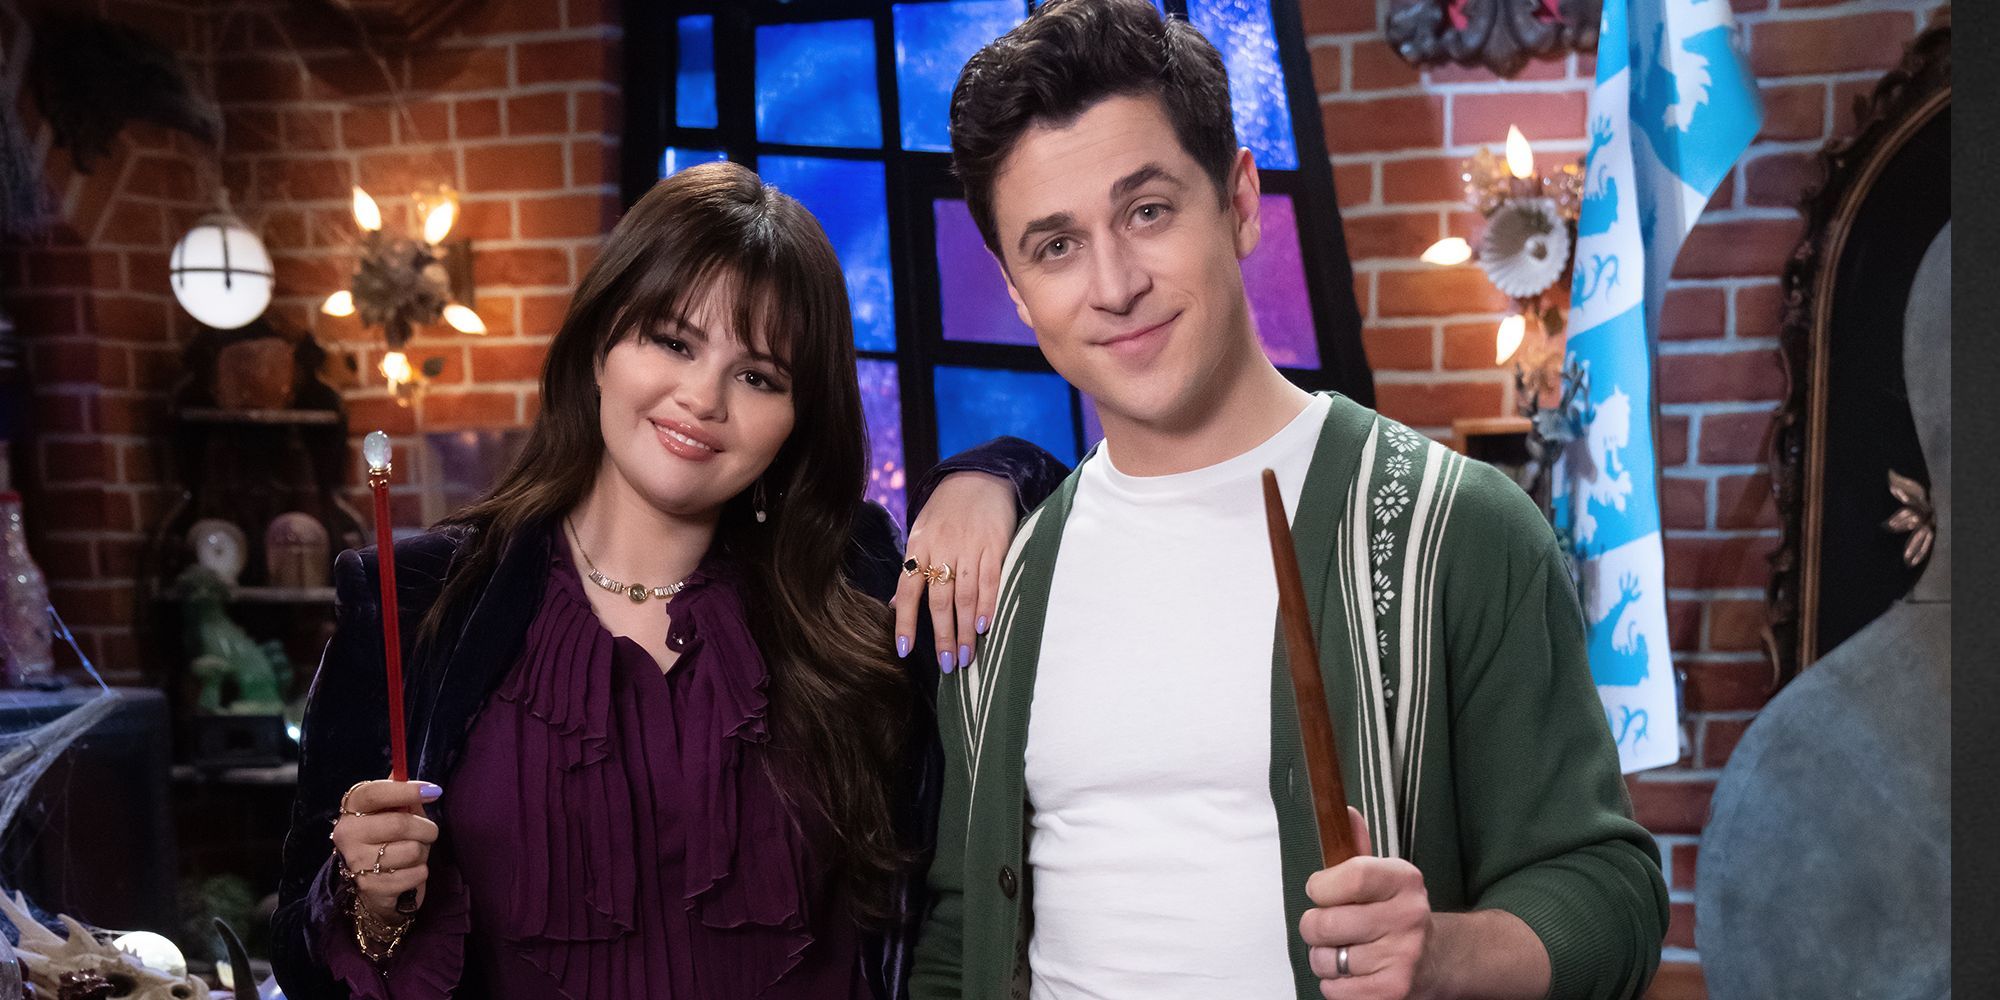 Selena Gomez and David Henrie standing together holding wands, while Gomez has her arm on Henrie's shoulder, on the Wizard Liar set from Wizards of Waverly Place